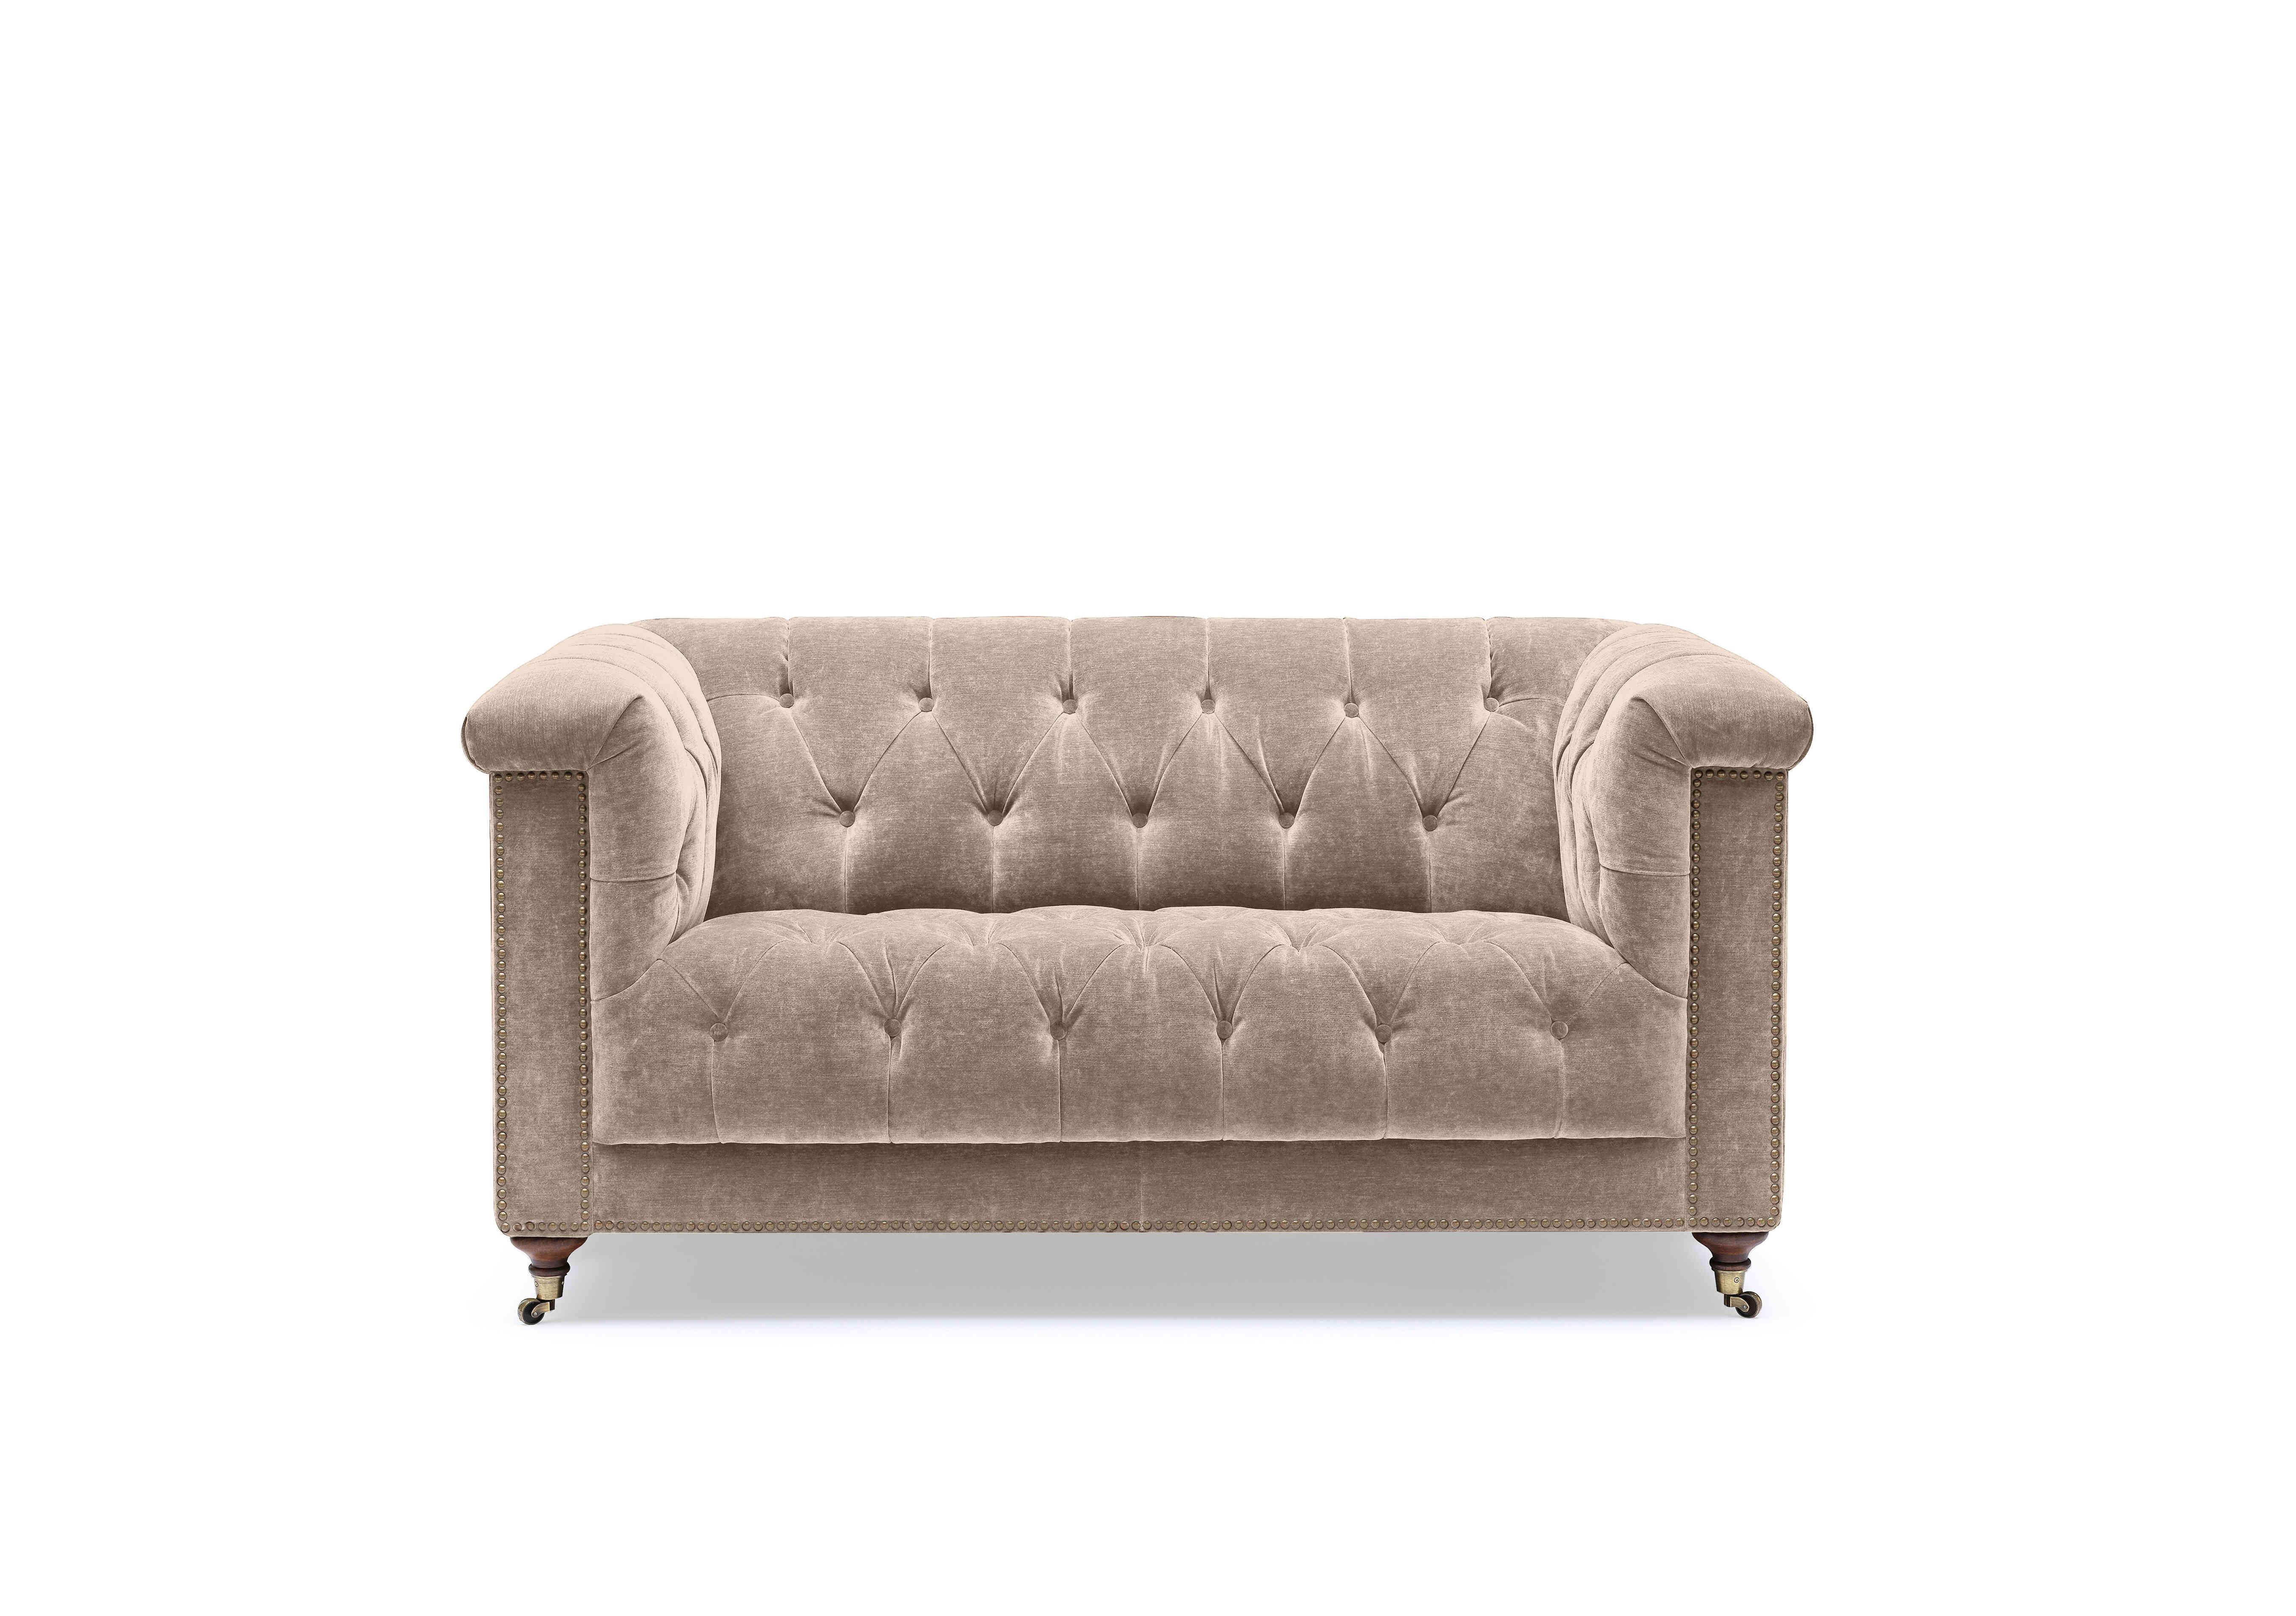 Wallace 2 Seater Fabric Chesterfield Sofa with USB-C in X3y1-W022 Barley on Furniture Village